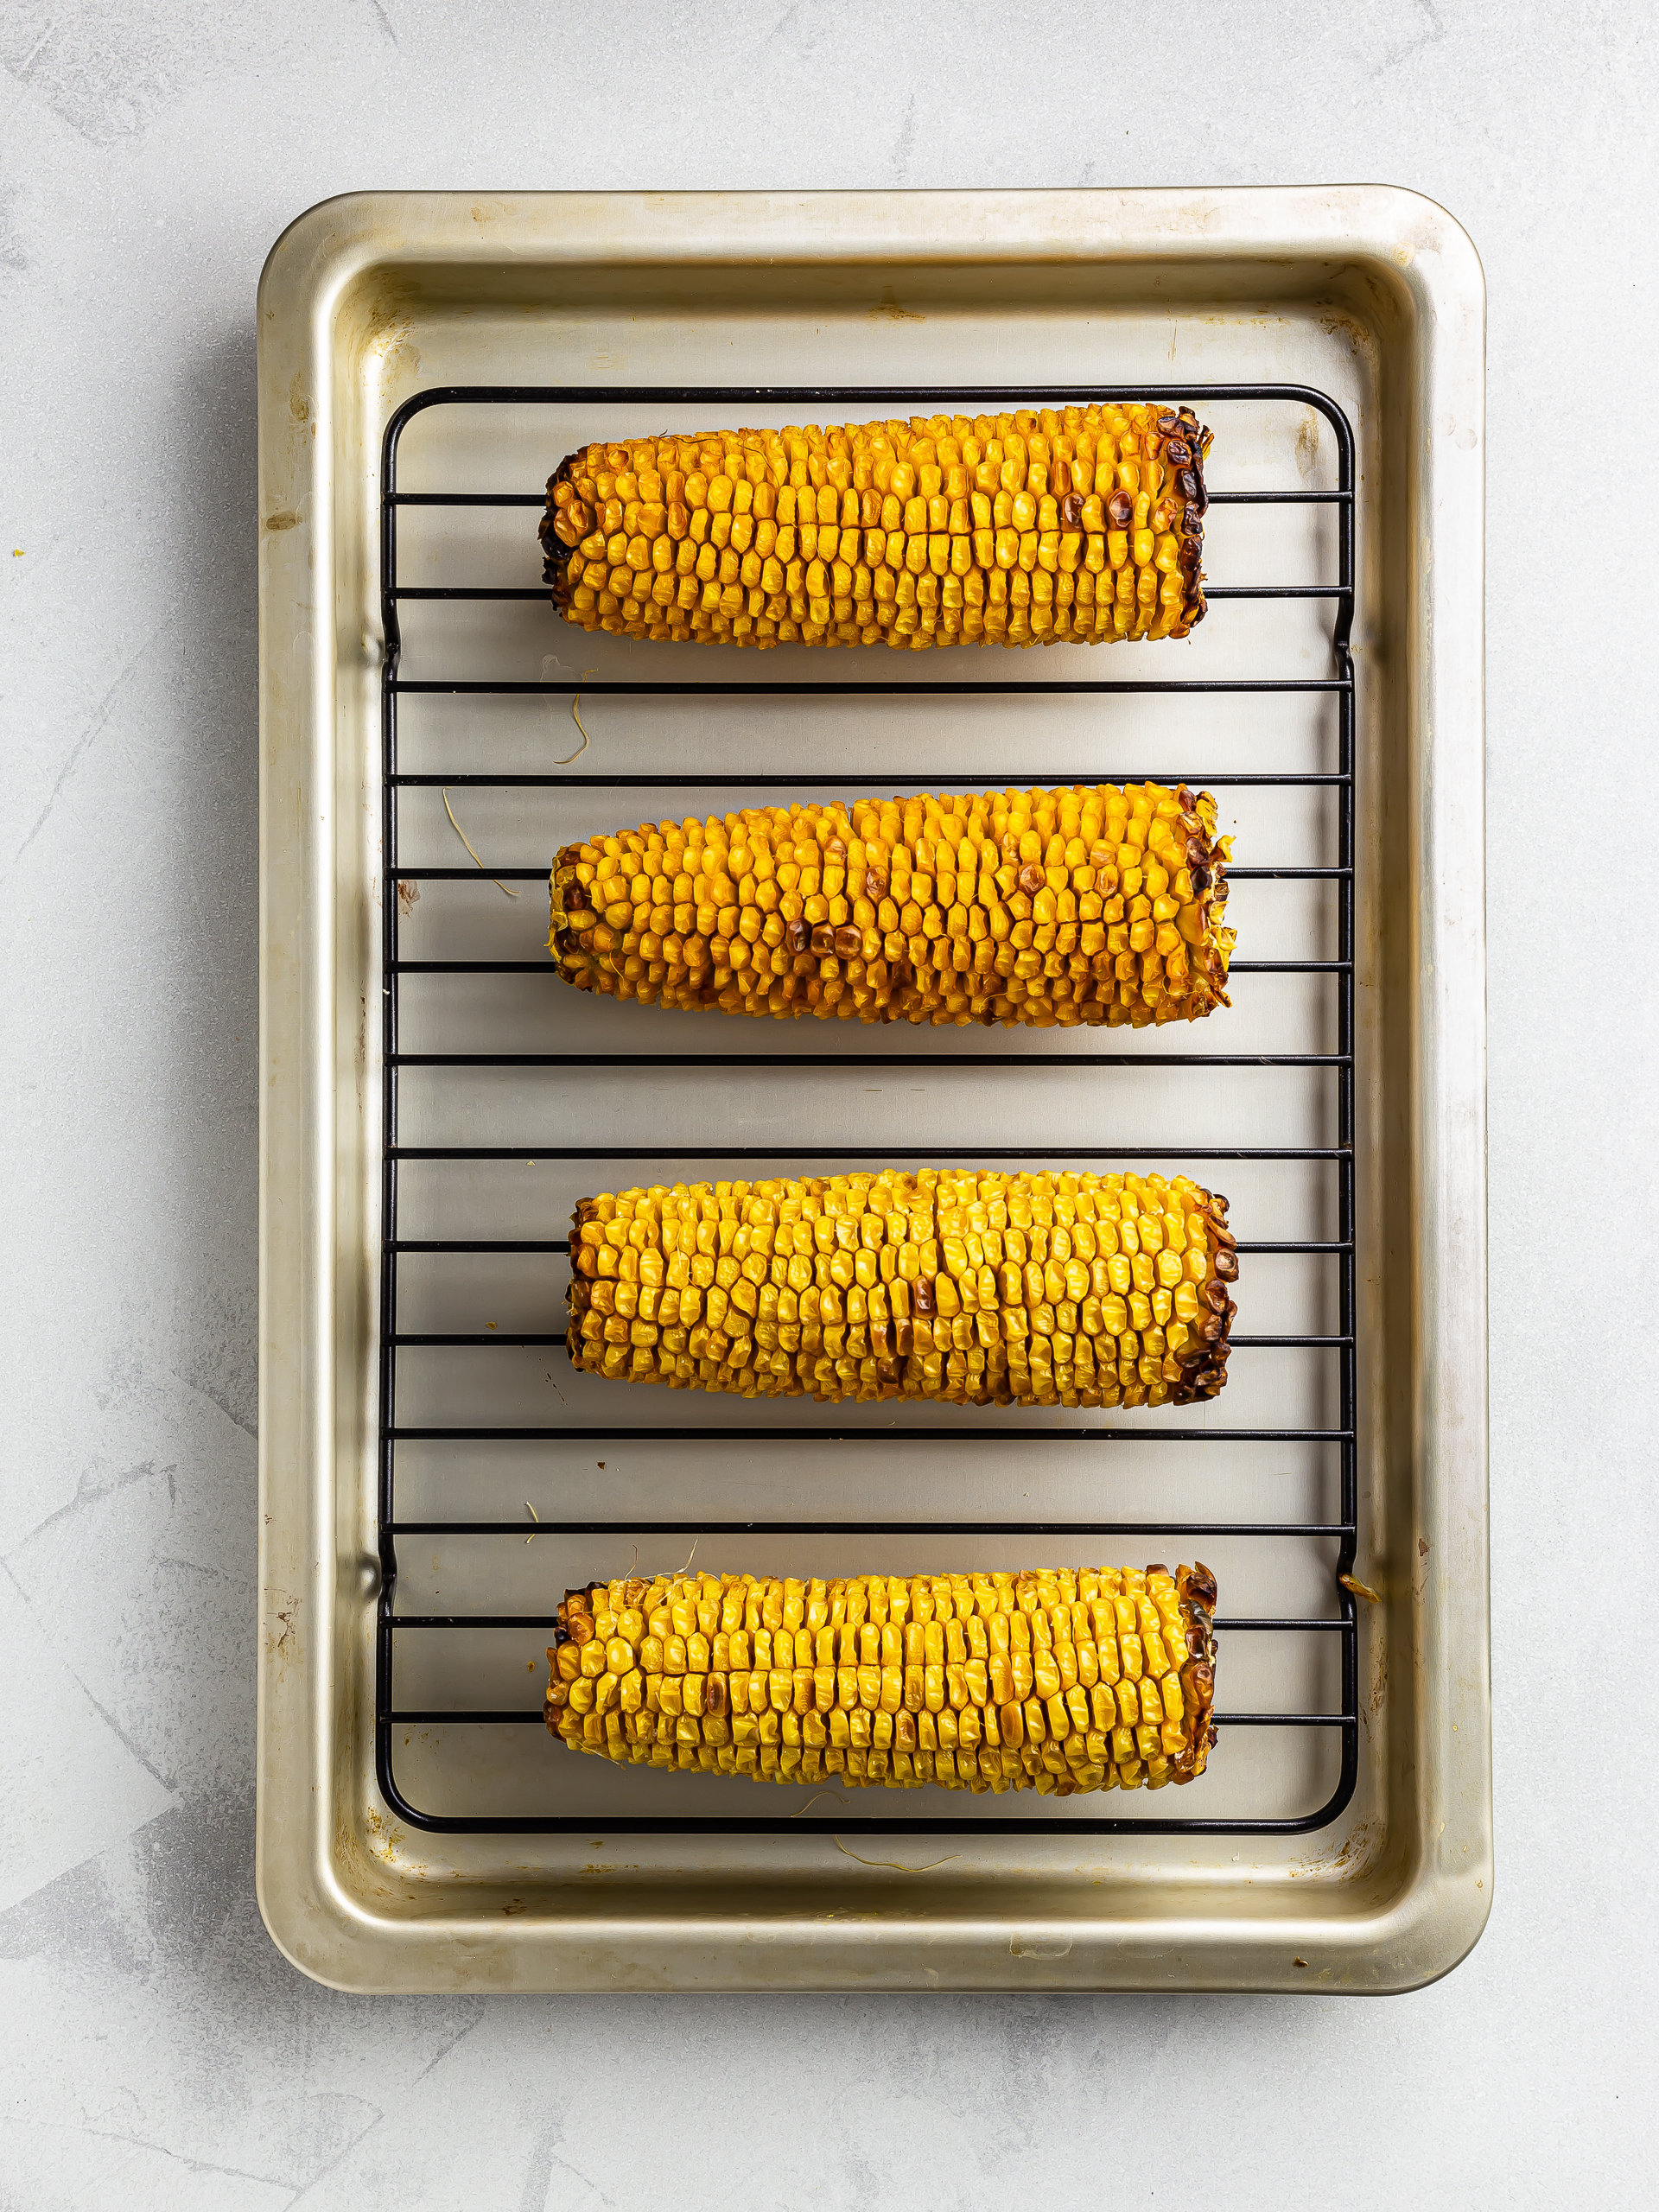 corn the cob grilled in the oven